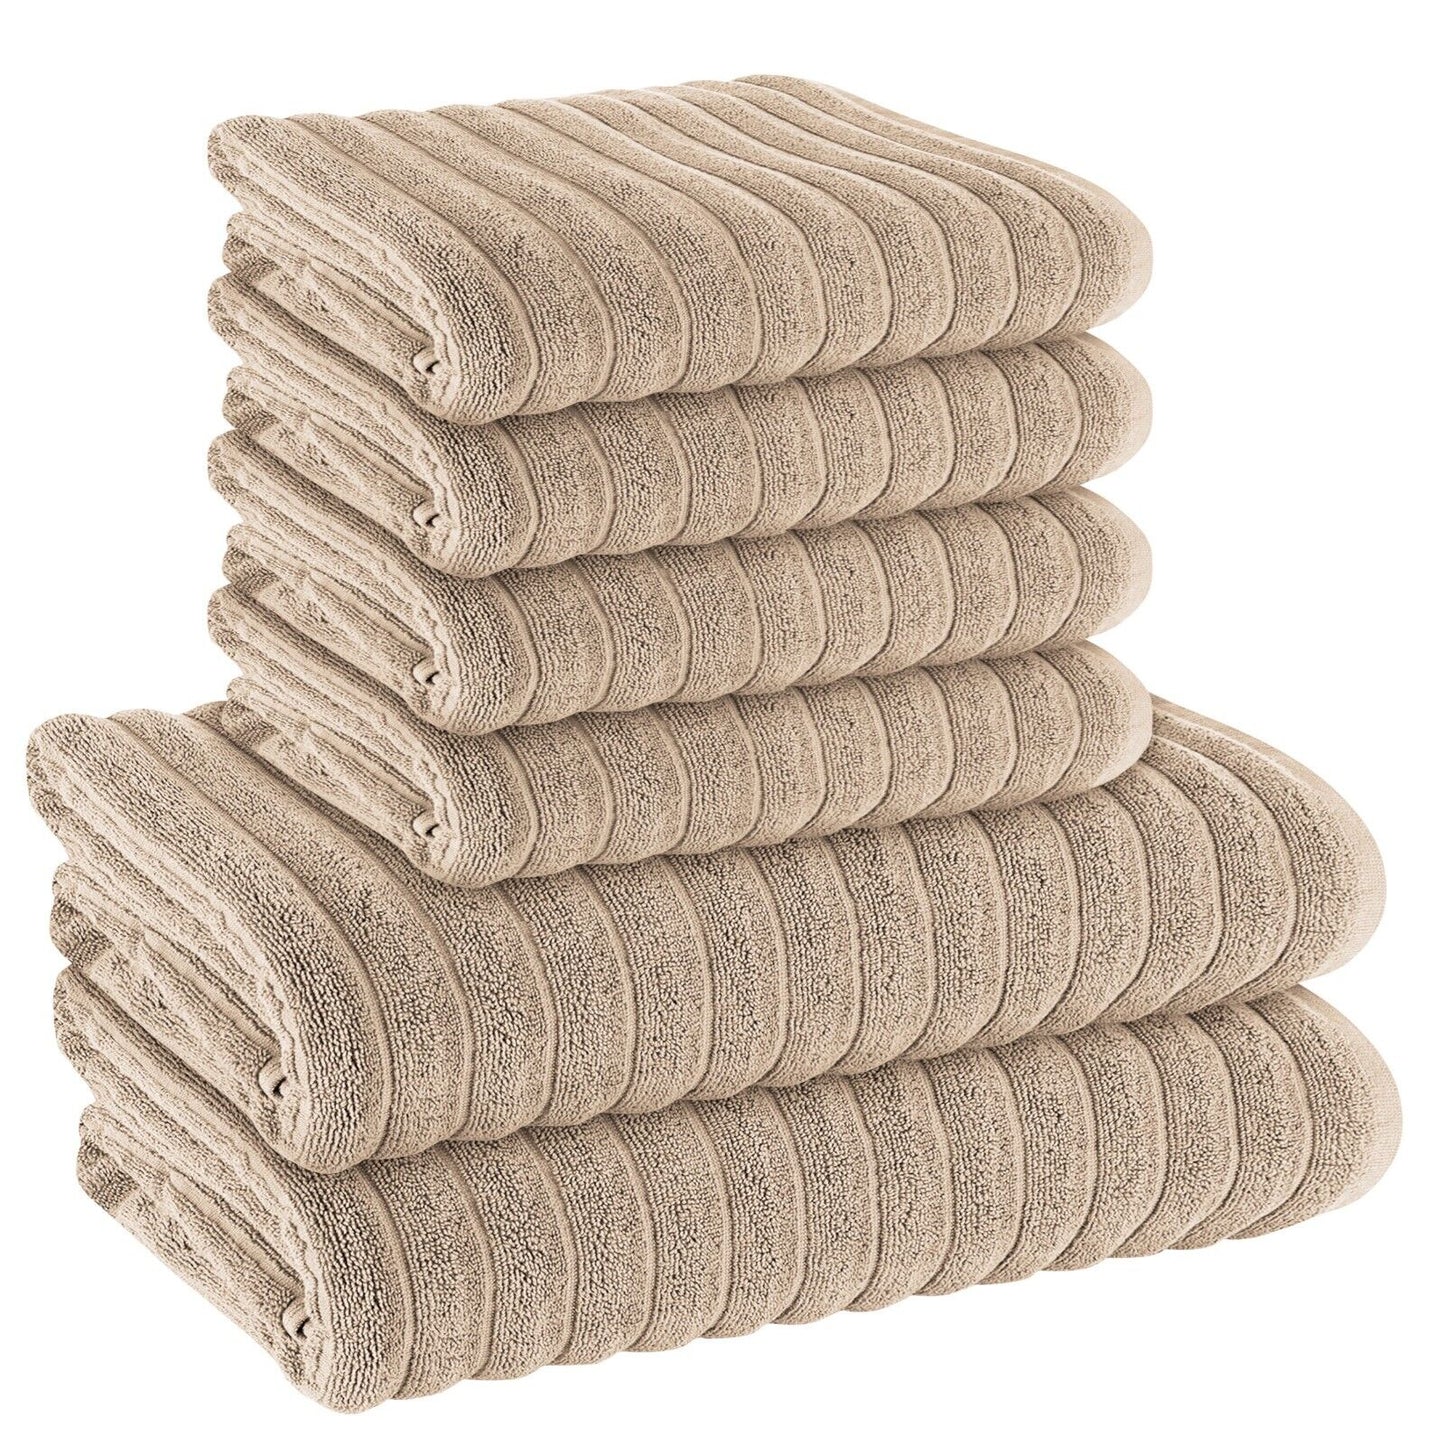 Hydro Cotton 6pcs Towels Bale Set 600 GSM Pure Ring Spun Cotton Super Soft Highly Absorbent and Quick Dry Hand and Bath Towels Sets